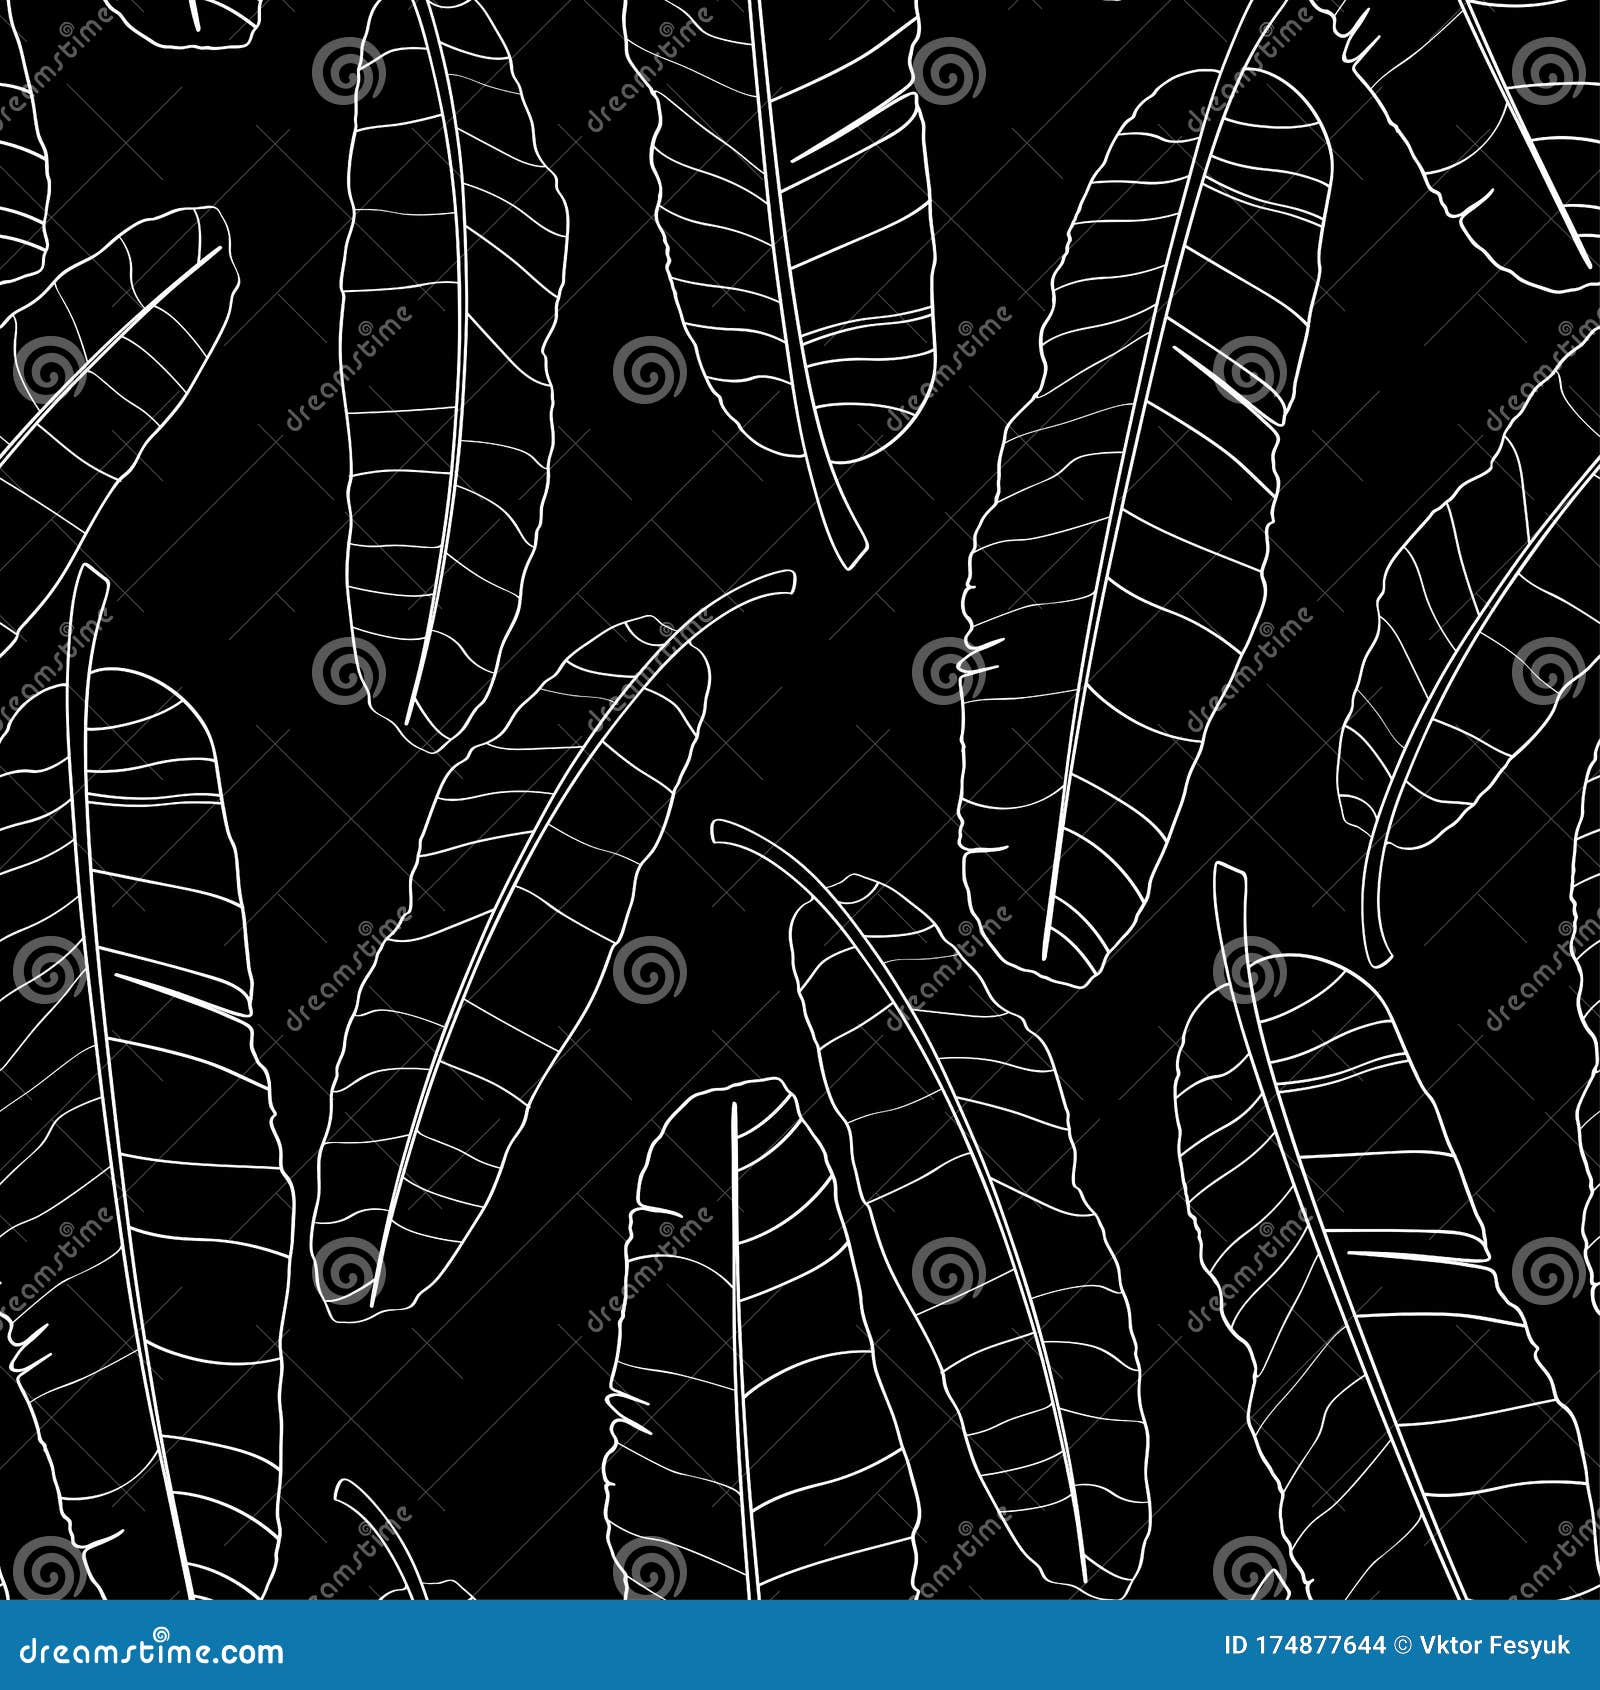 Seamless Banana Leaf Pattern Background. Black and White with Drawing